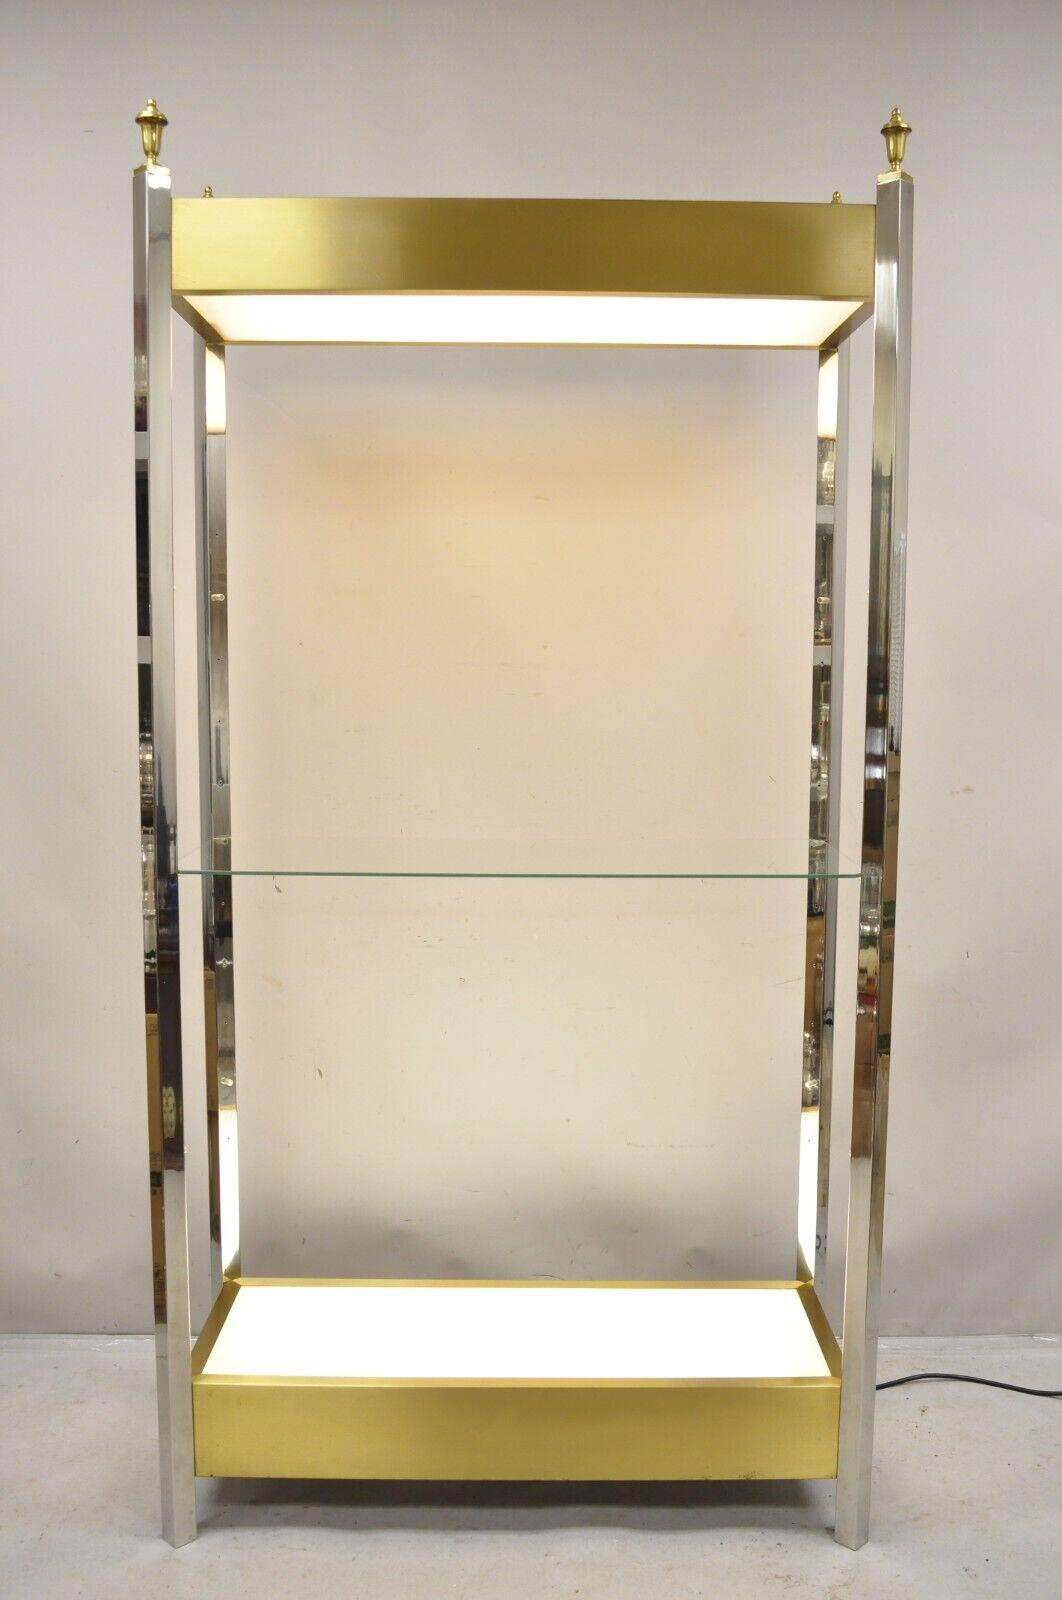 Vintage Illuminated Chrome and Brass Light Up Display Shelf Curio Etagere For Sale 7